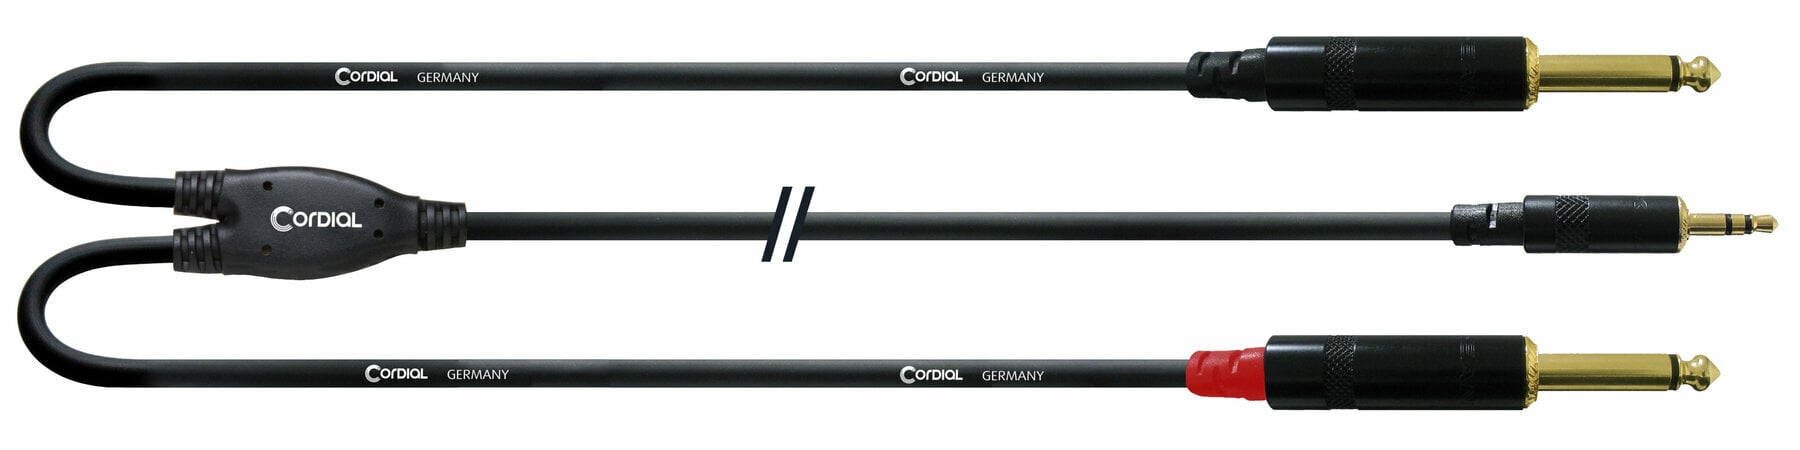 Cordial CFY 1,5 WPP 1,5 m Audio Cable